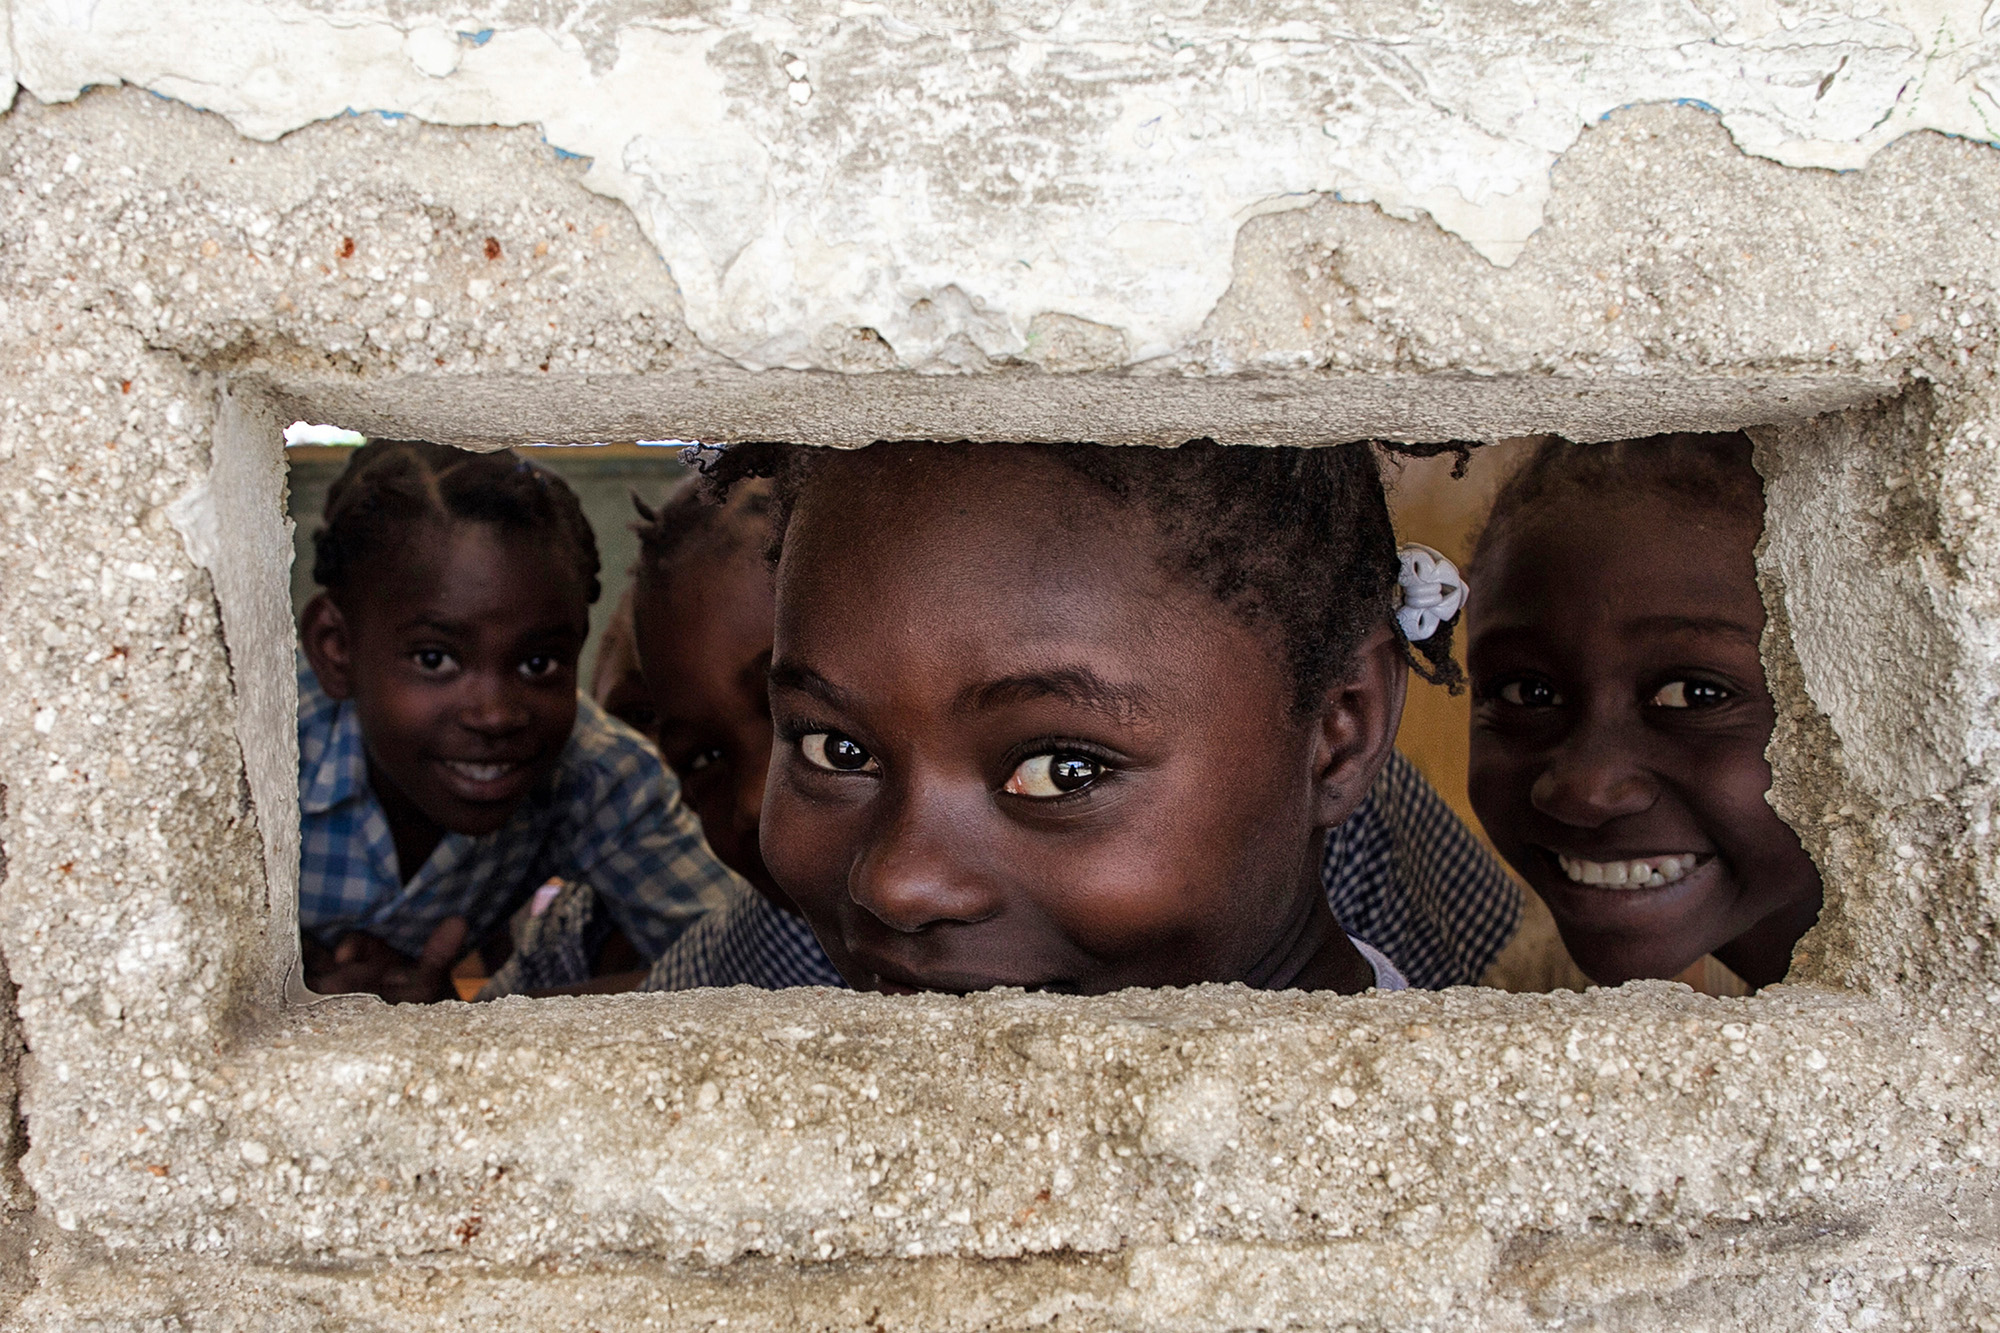 A group of Haitian children looking out of a small window.